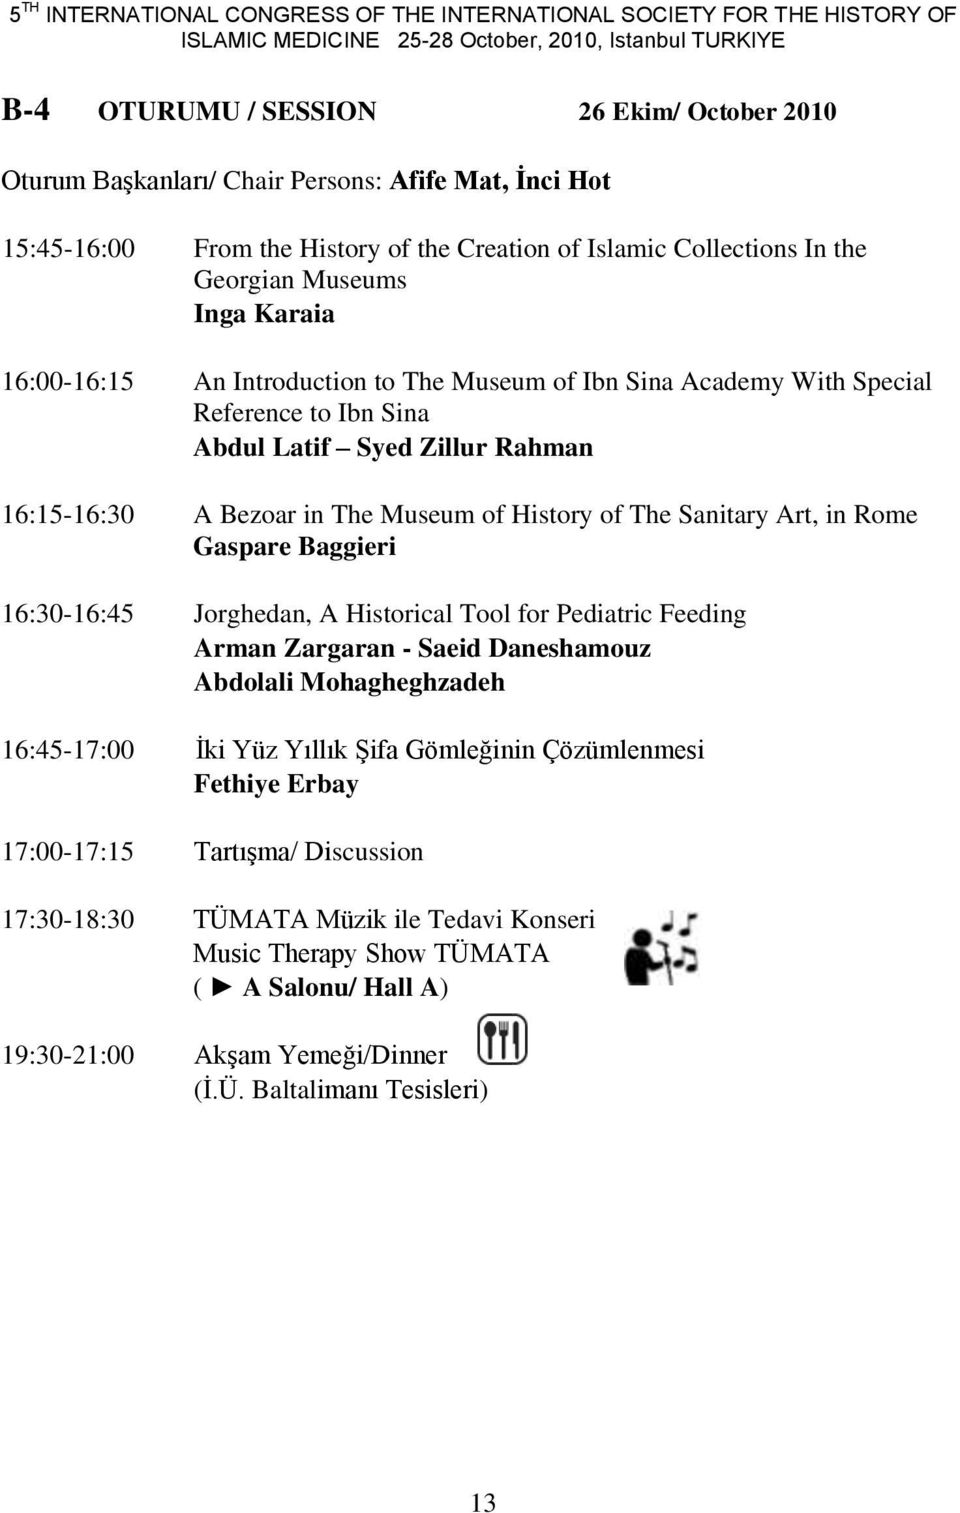 Special Reference to Ibn Sina Abdul Latif Syed Zillur Rahman 16:15-16:30 A Bezoar in The Museum of History of The Sanitary Art, in Rome Gaspare Baggieri 16:30-16:45 Jorghedan, A Historical Tool for